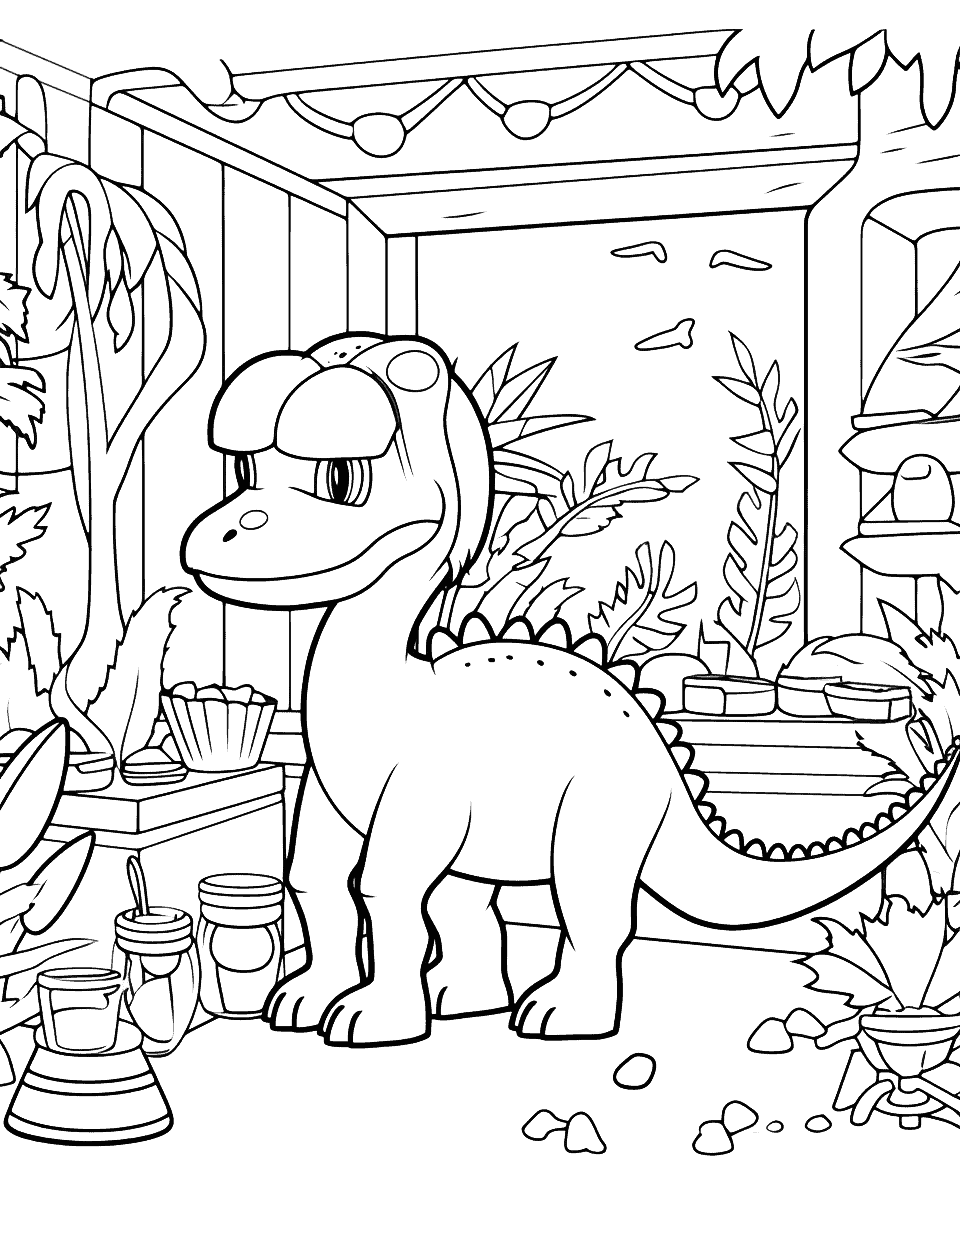 Jurassic World Lab Dinosaur Coloring Page - The laboratory where dinosaurs are created in Jurassic World.